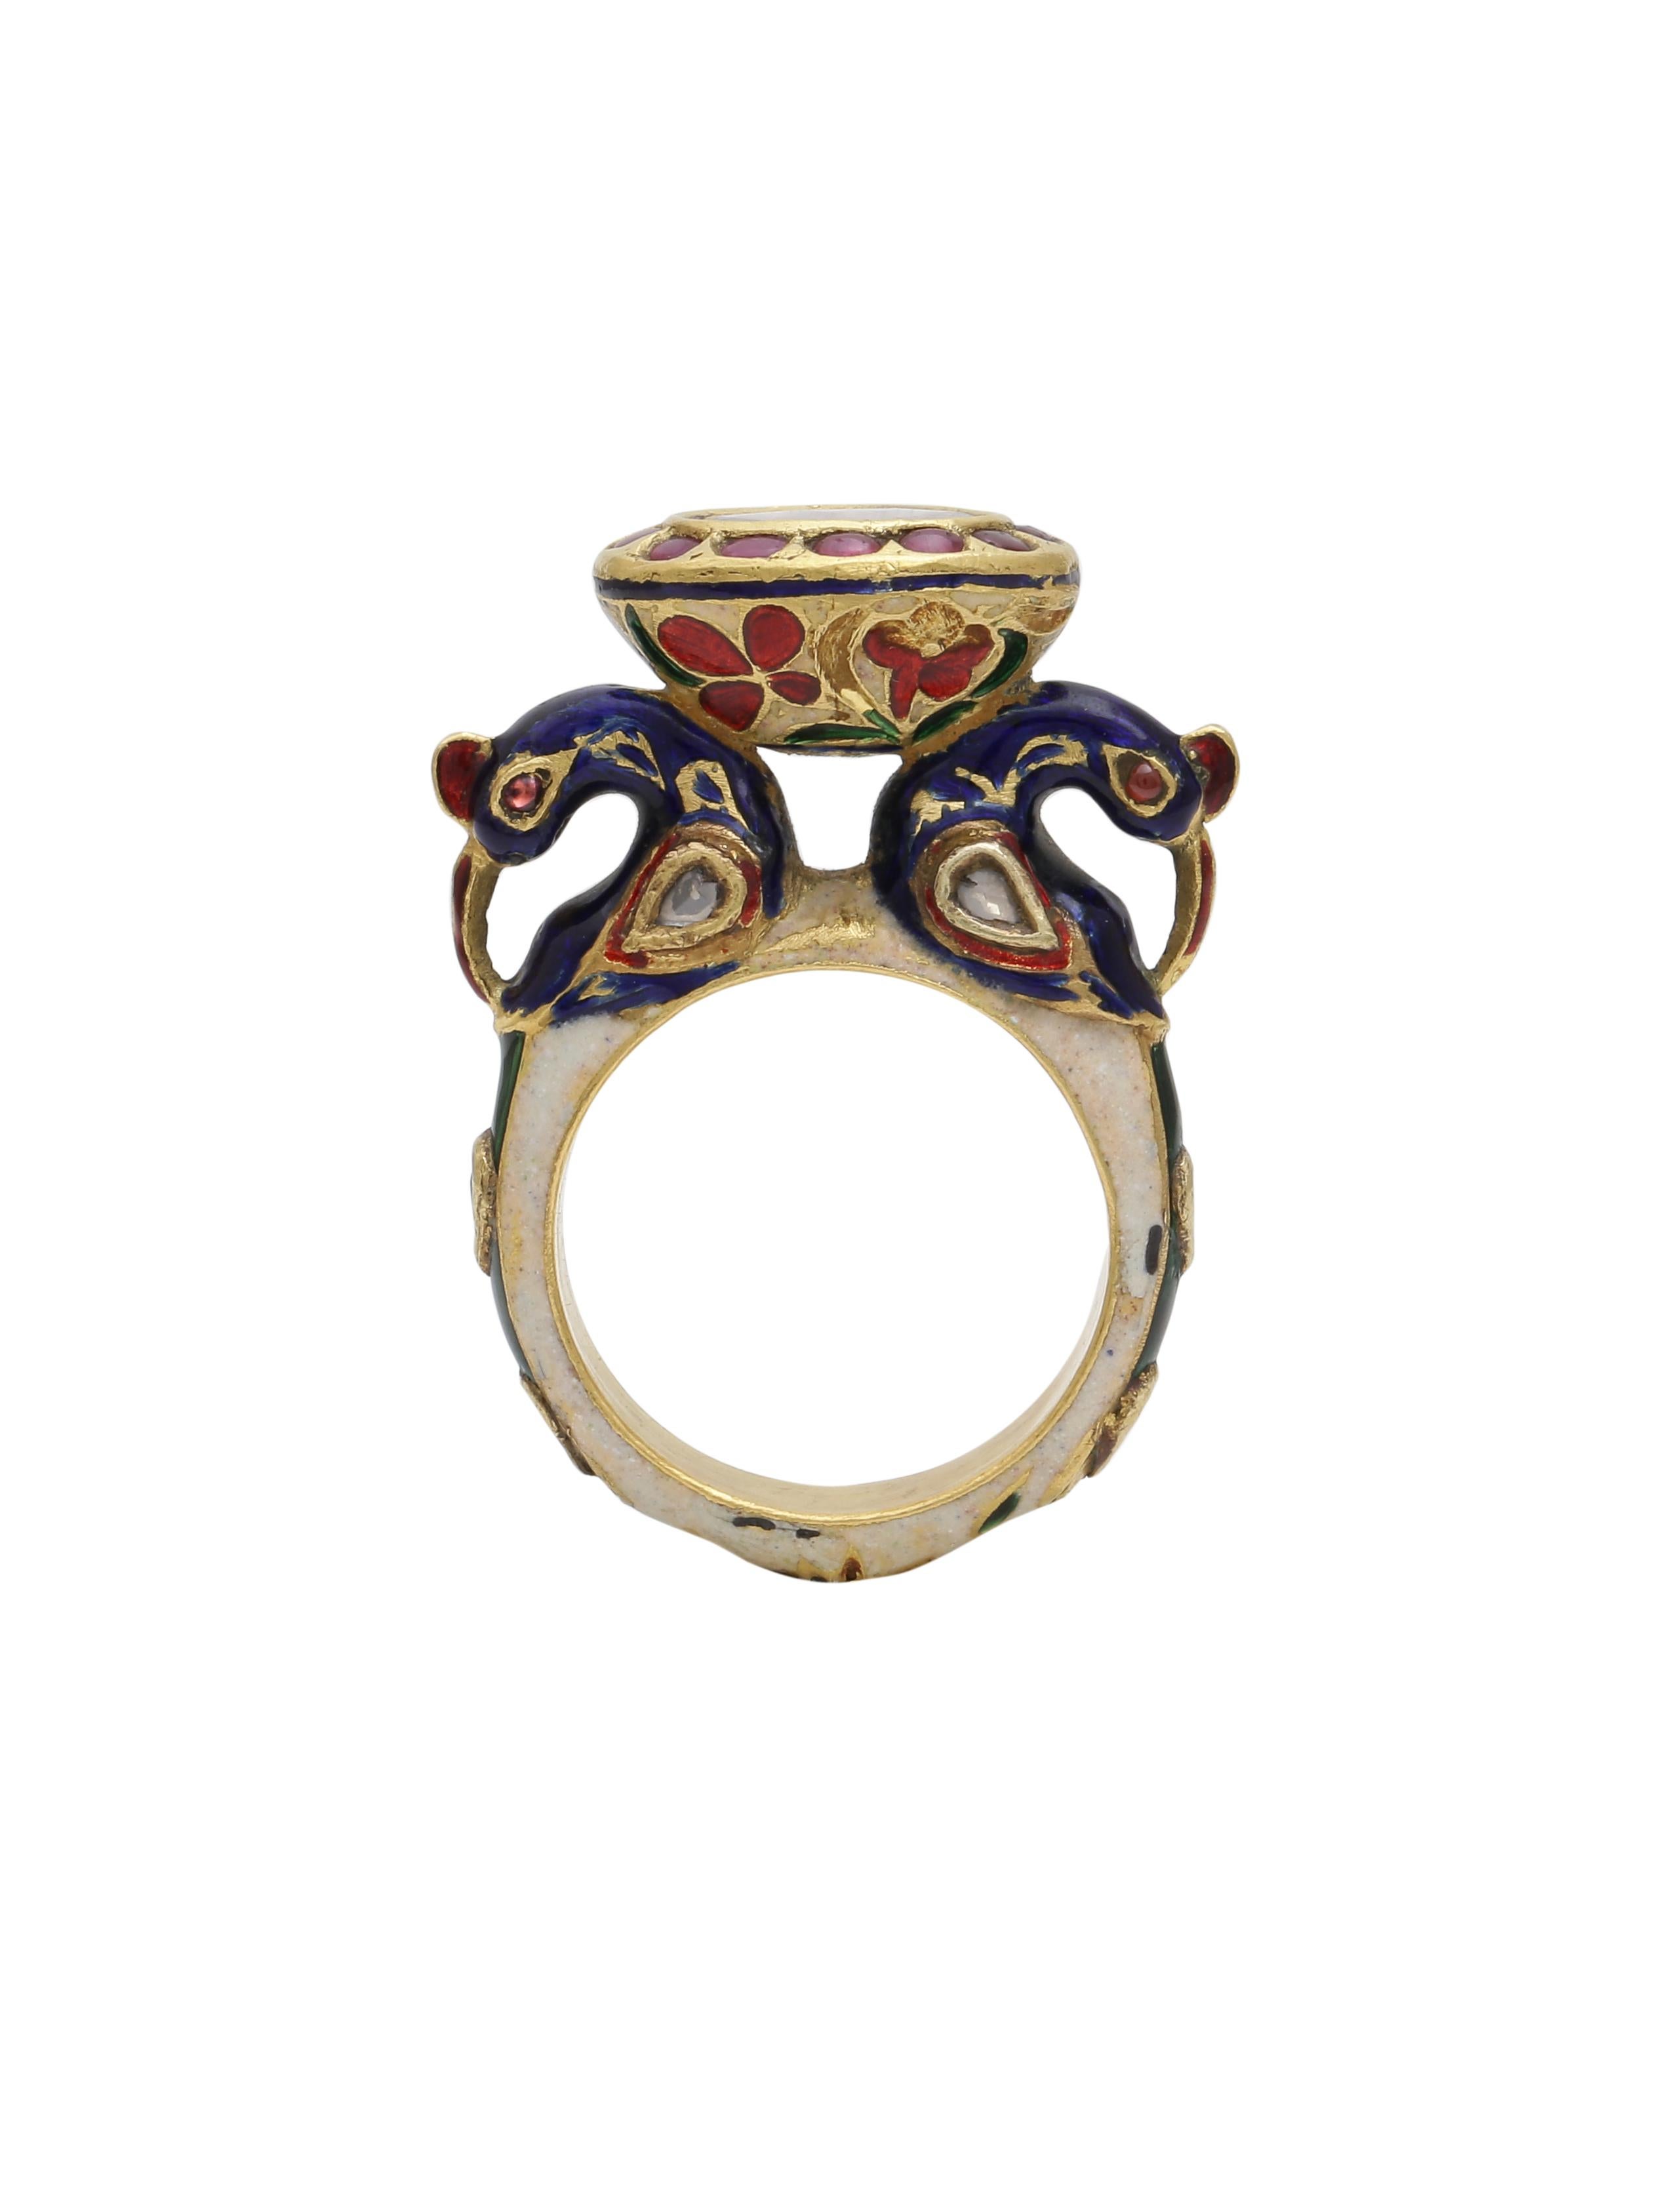 A beautiful cocktail ring with a Rosecut Diamond in the centre and intricate enamel all over the ring. Holding the beautiful Diamond are 2 peacocks also handcrafted in gold with blue enamel and diamonds to show detailing in the bird.
The ring is